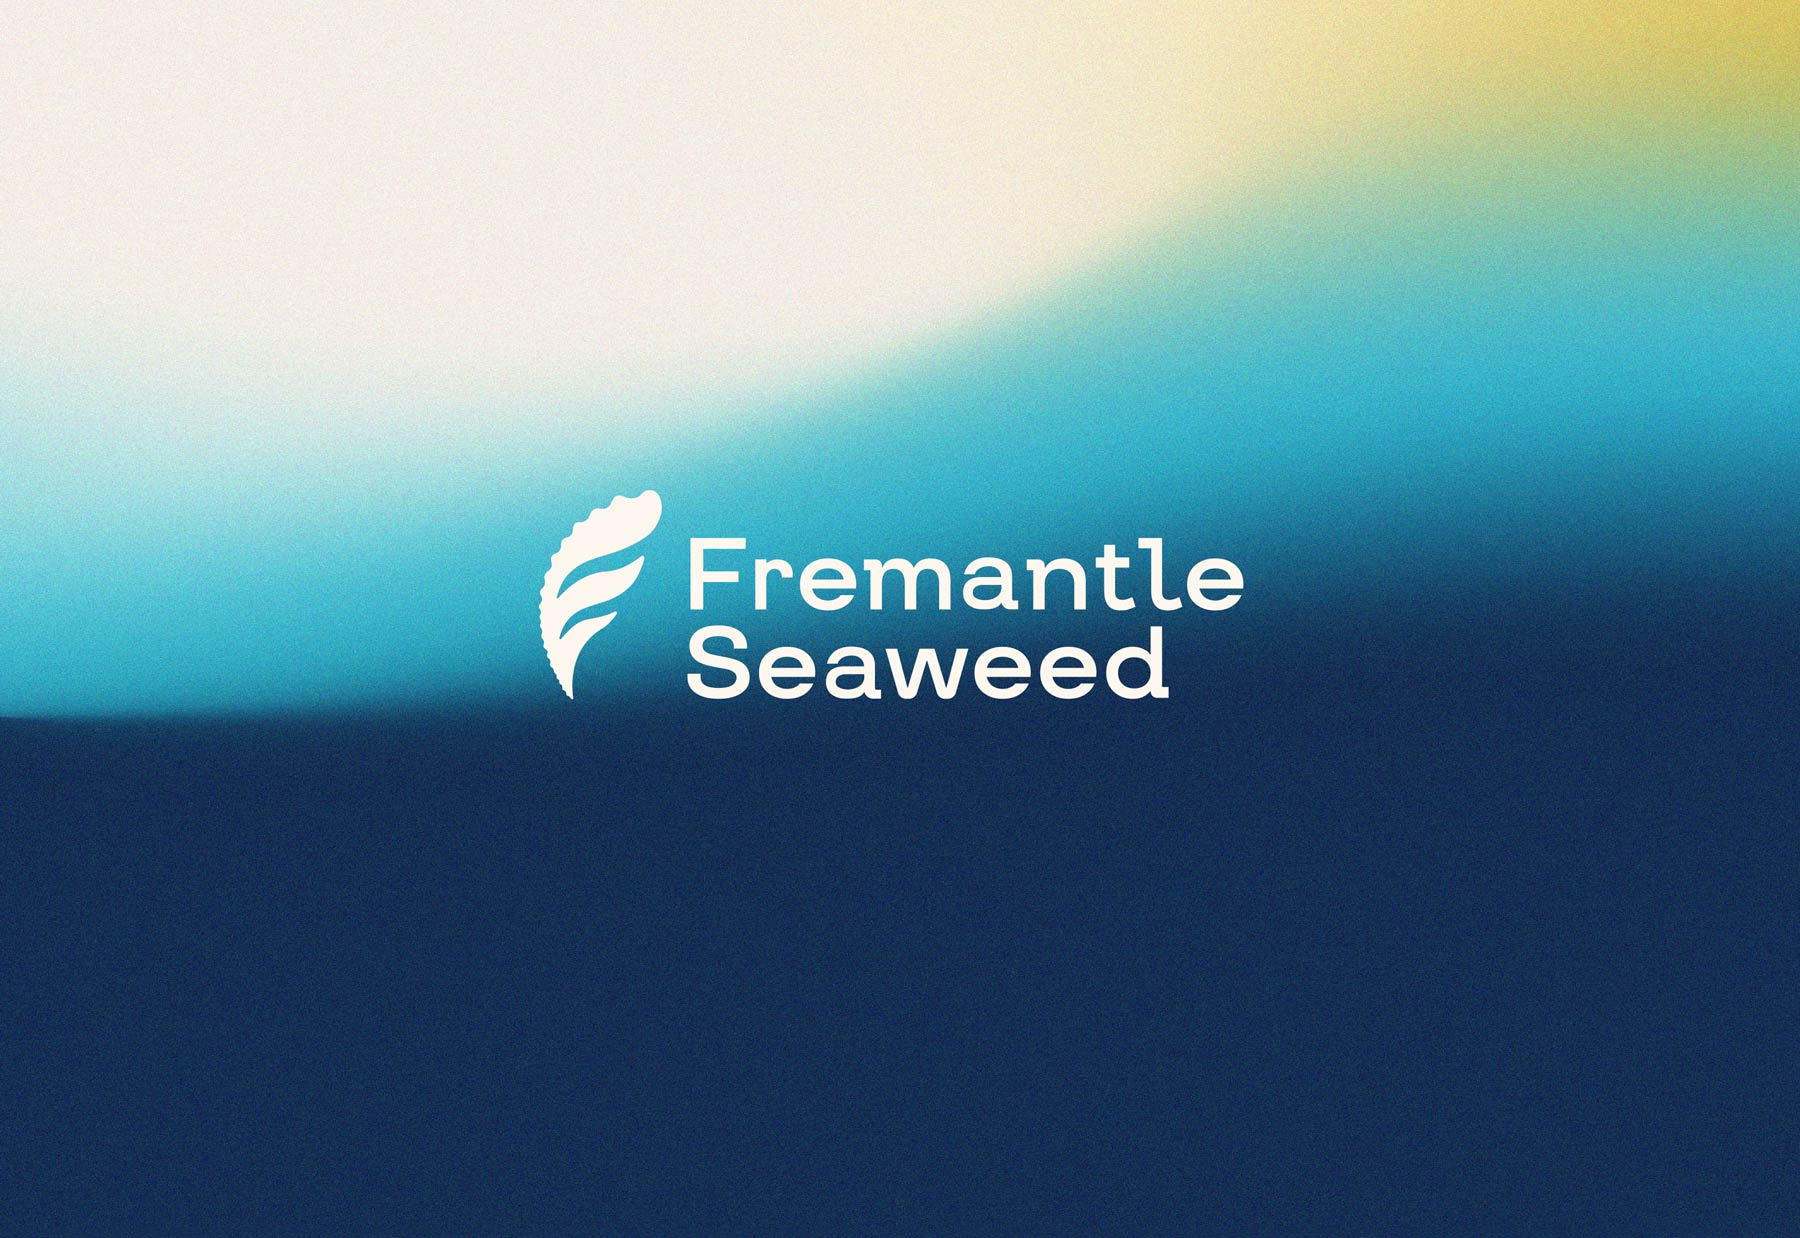 Freamantle Seaweed logo and brand design